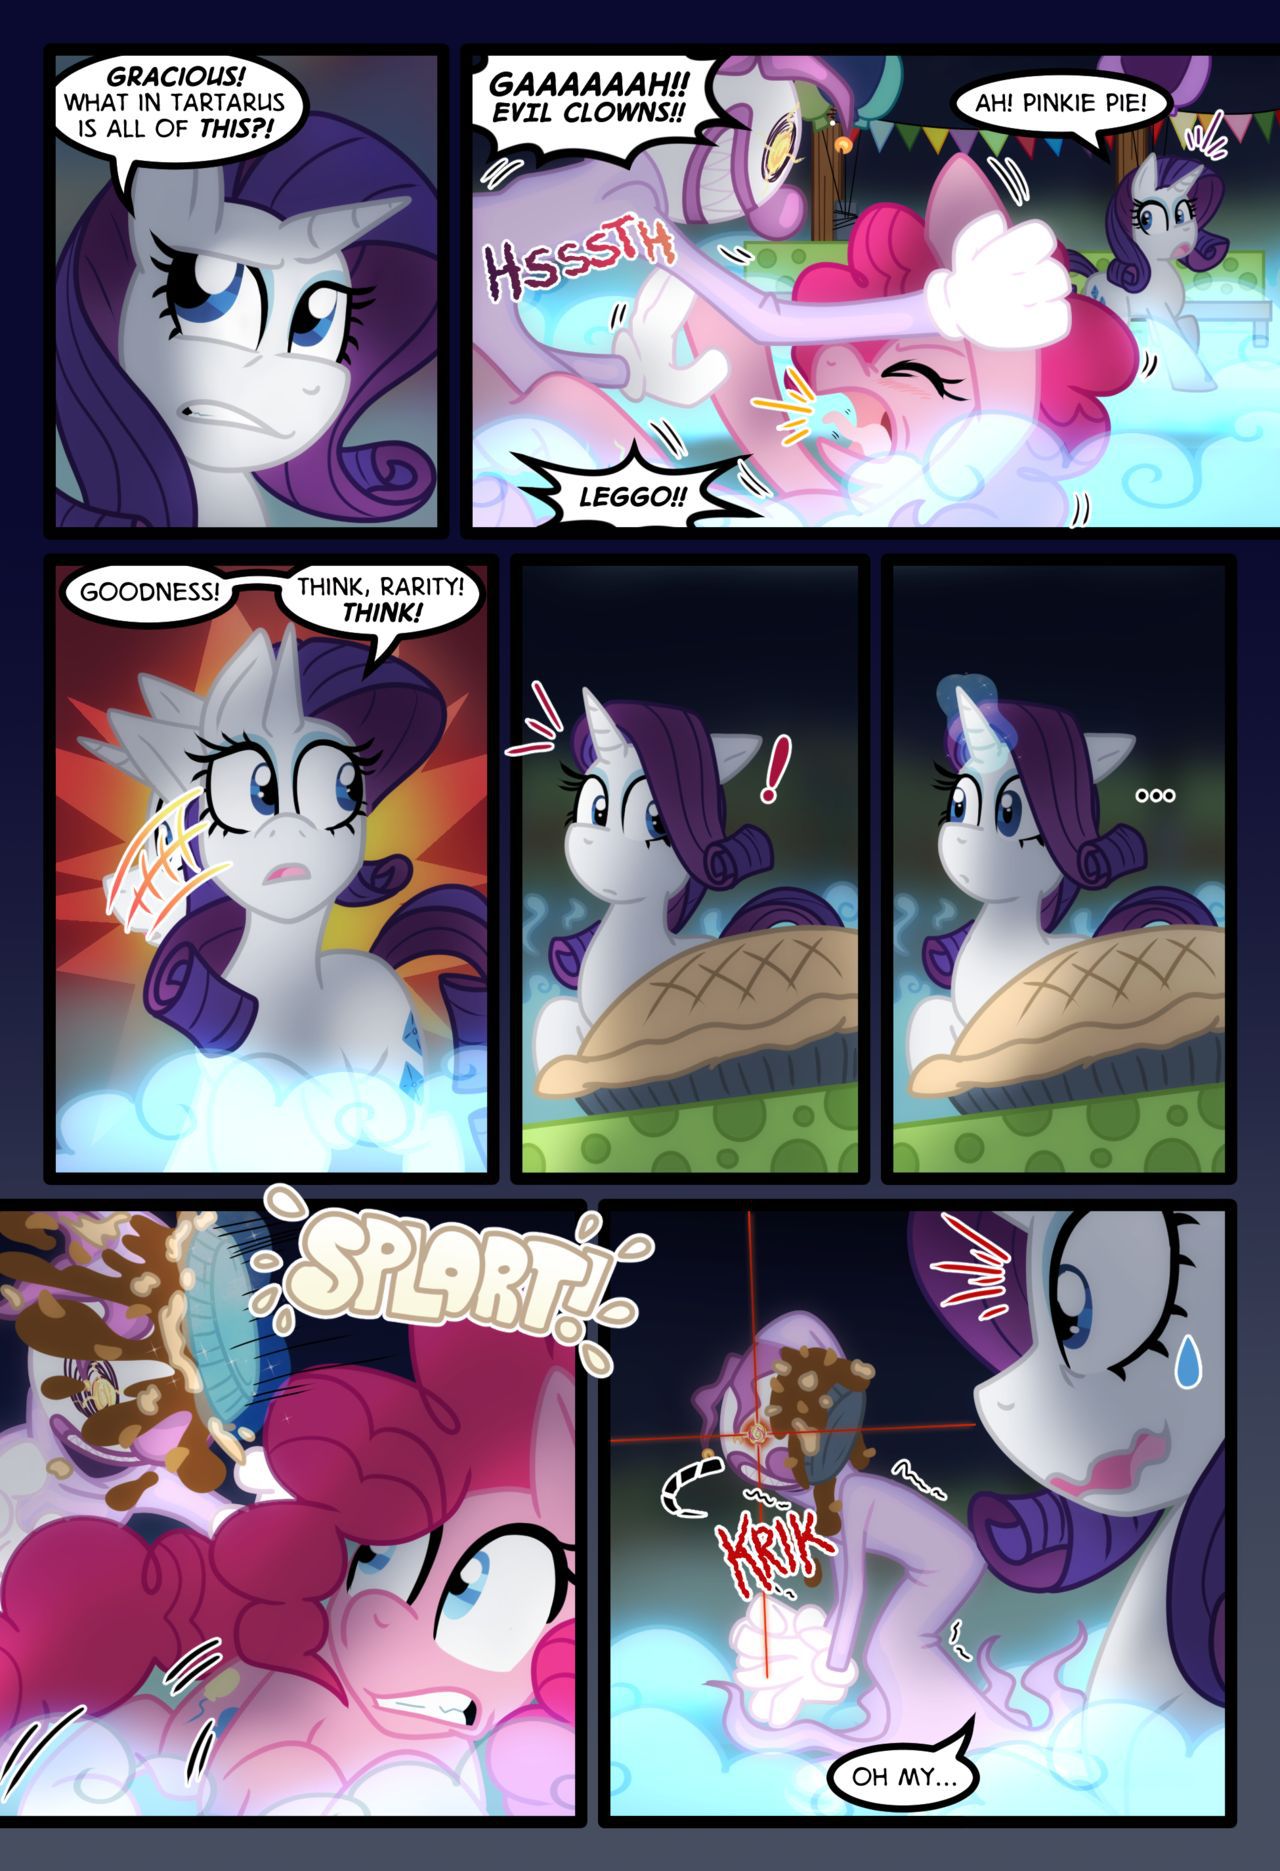 [Zaron] Lonely Hooves (My Little Pony Friendship Is Magic) [Ongoing] 132